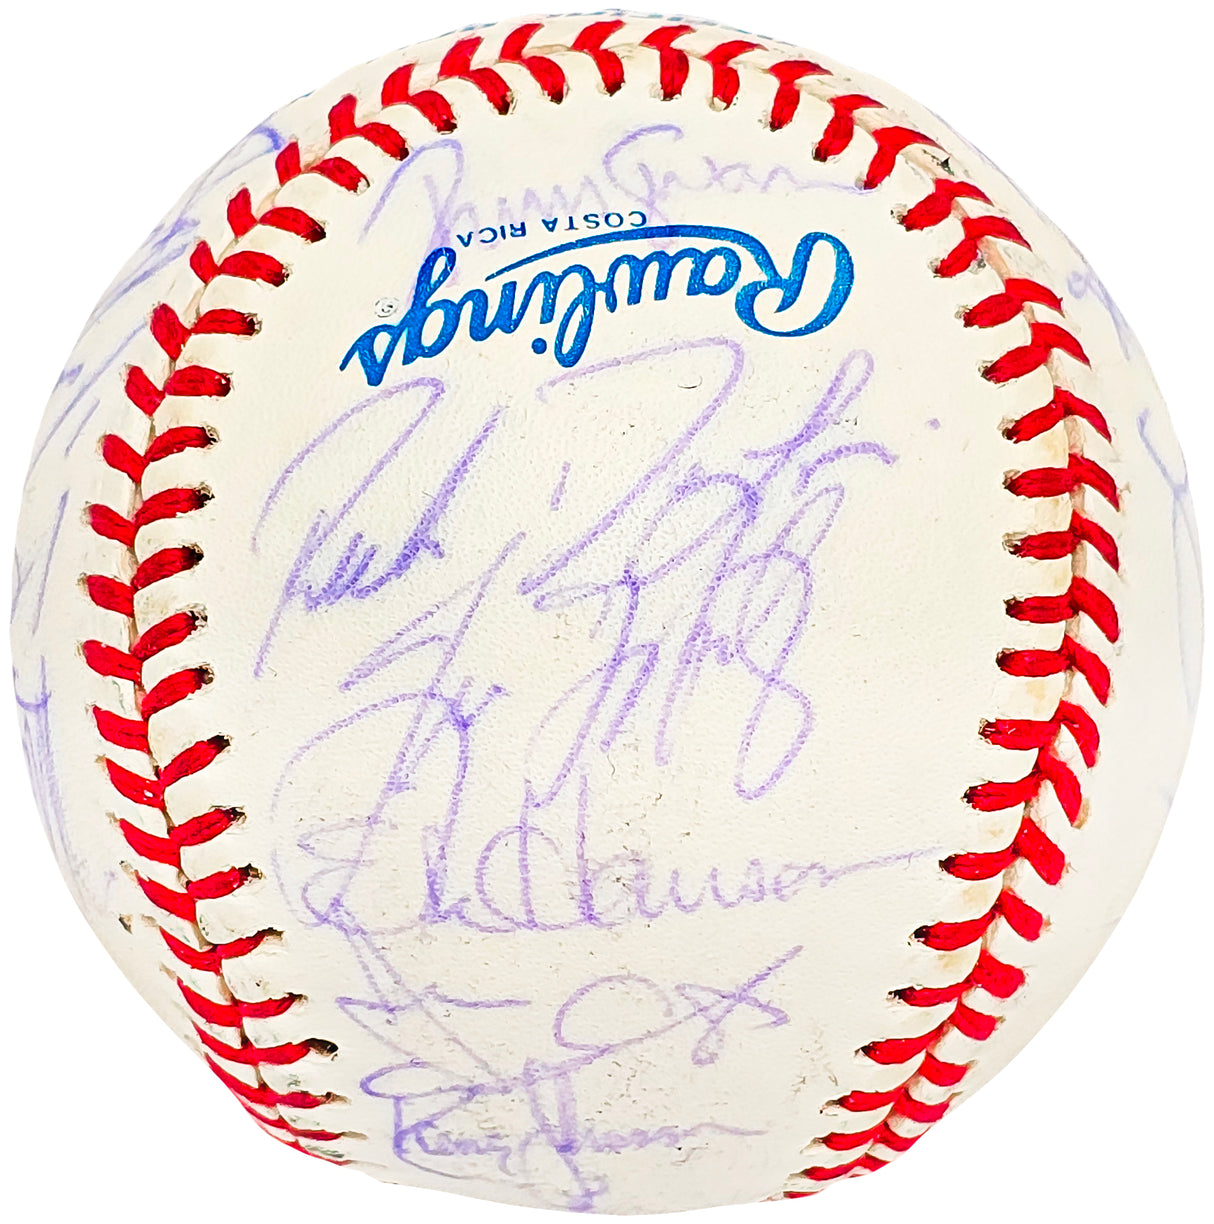 1992 Seattle Mariners Team Signed Autographed Official AL Baseball With 25 Signatures Including Ken Griffey Jr. SKU #218493